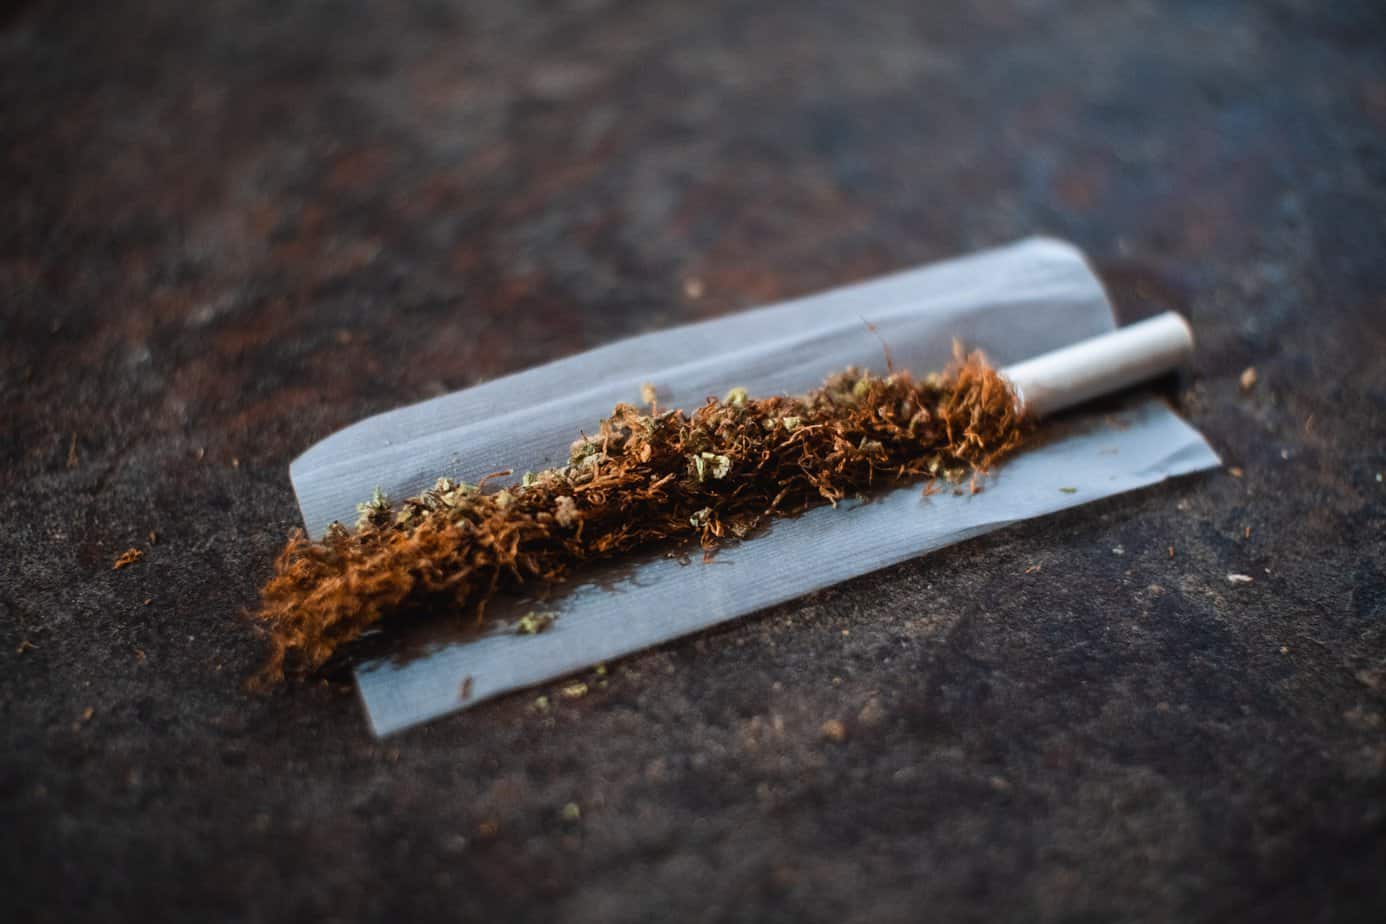 How to Make Your Own Cigarettes: A Step-by-Step Guide